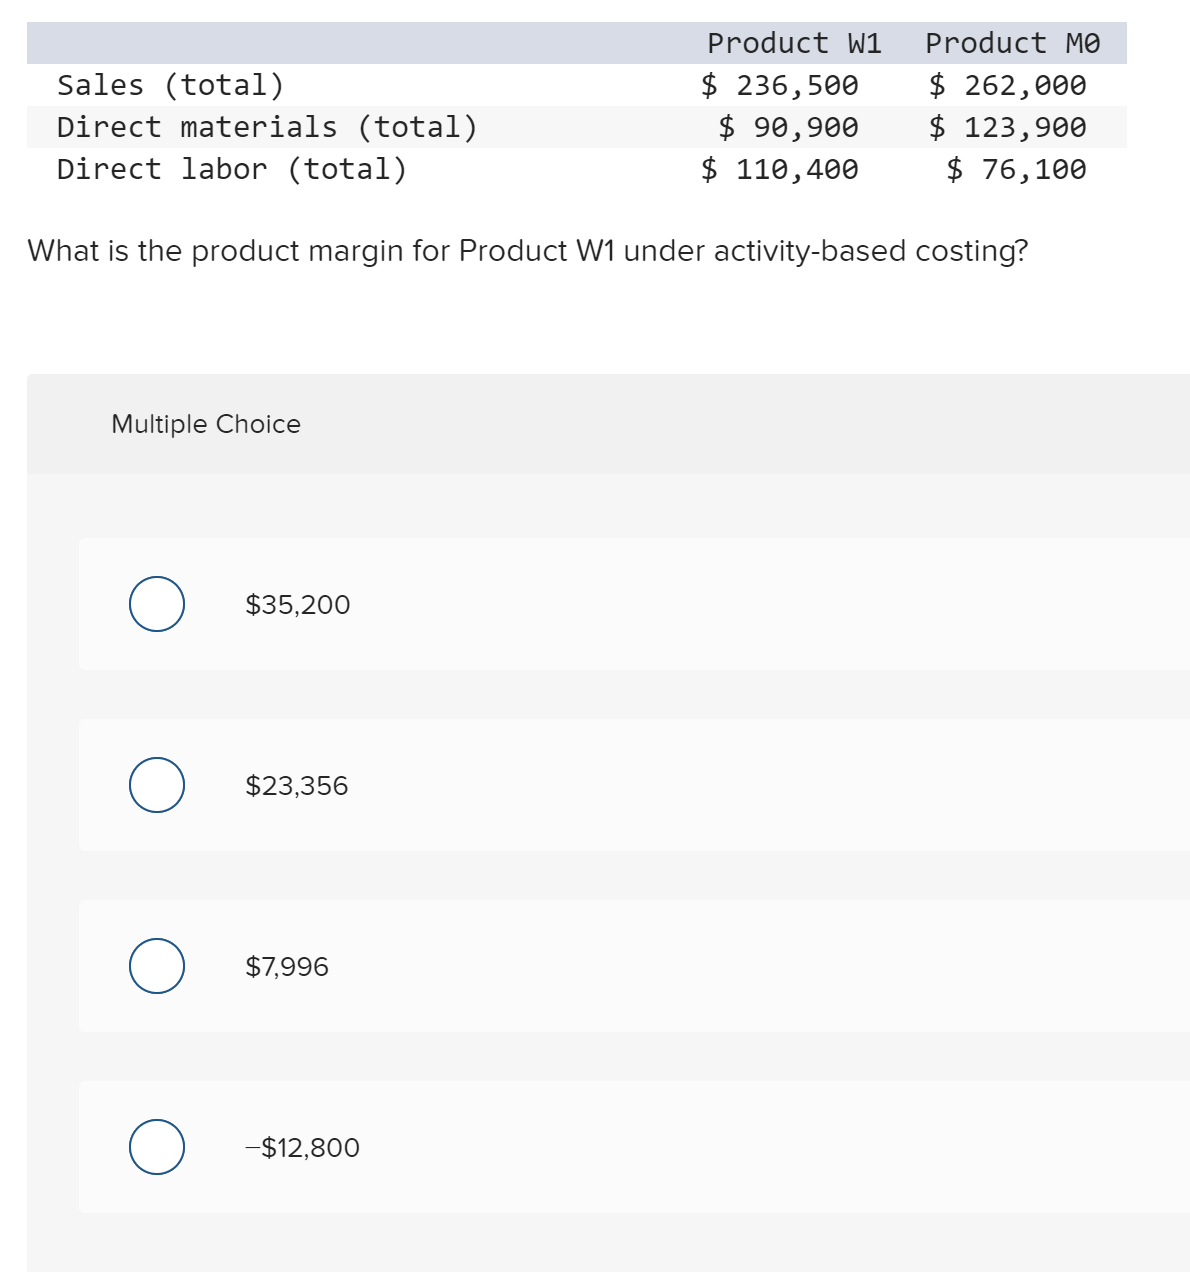 Product W1
Product MO
Sales (total)
Direct materials (total)
$ 236,500
$ 90,900
$ 110,400
$ 262,000
$ 123,900
$ 76,100
Direct labor (total)
What is the product margin for Product W1 under activity-based costing?
Multiple Choice
$35,200
$23,356
$7,996
-$12,800
